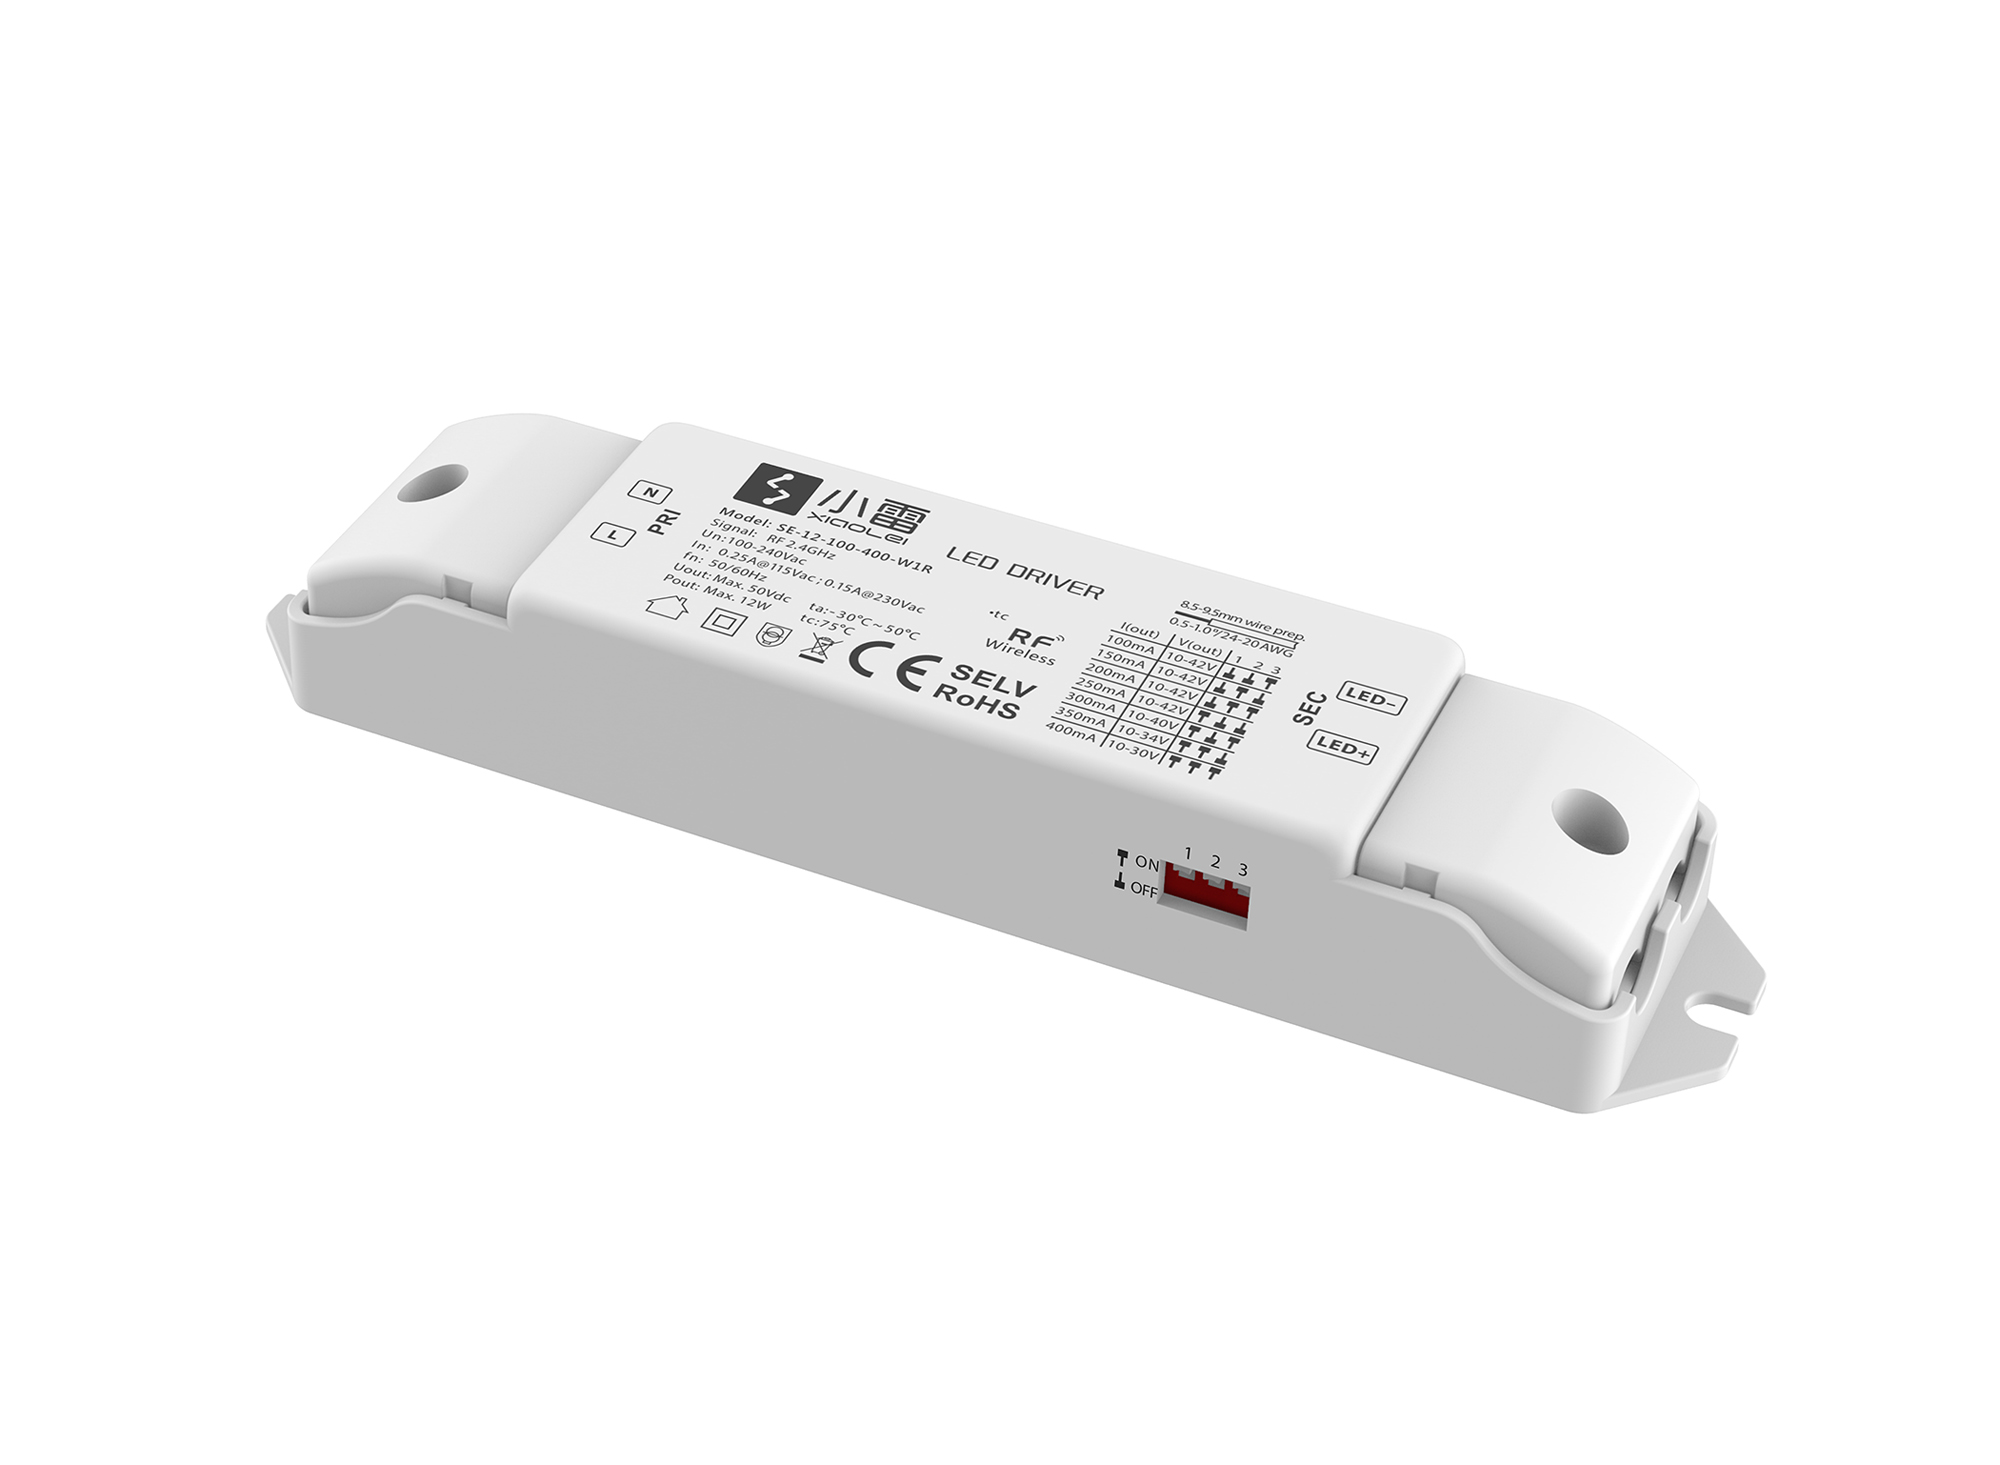 SE-12-100-400-W1R  Ltech Smart home Wireless Dimmablre LED Driver 1-12W 10-42Vdc/350-700mA. 0-100% PWM dimming, Over voltage, over load, Over heat and Short circuit protection, IP20.